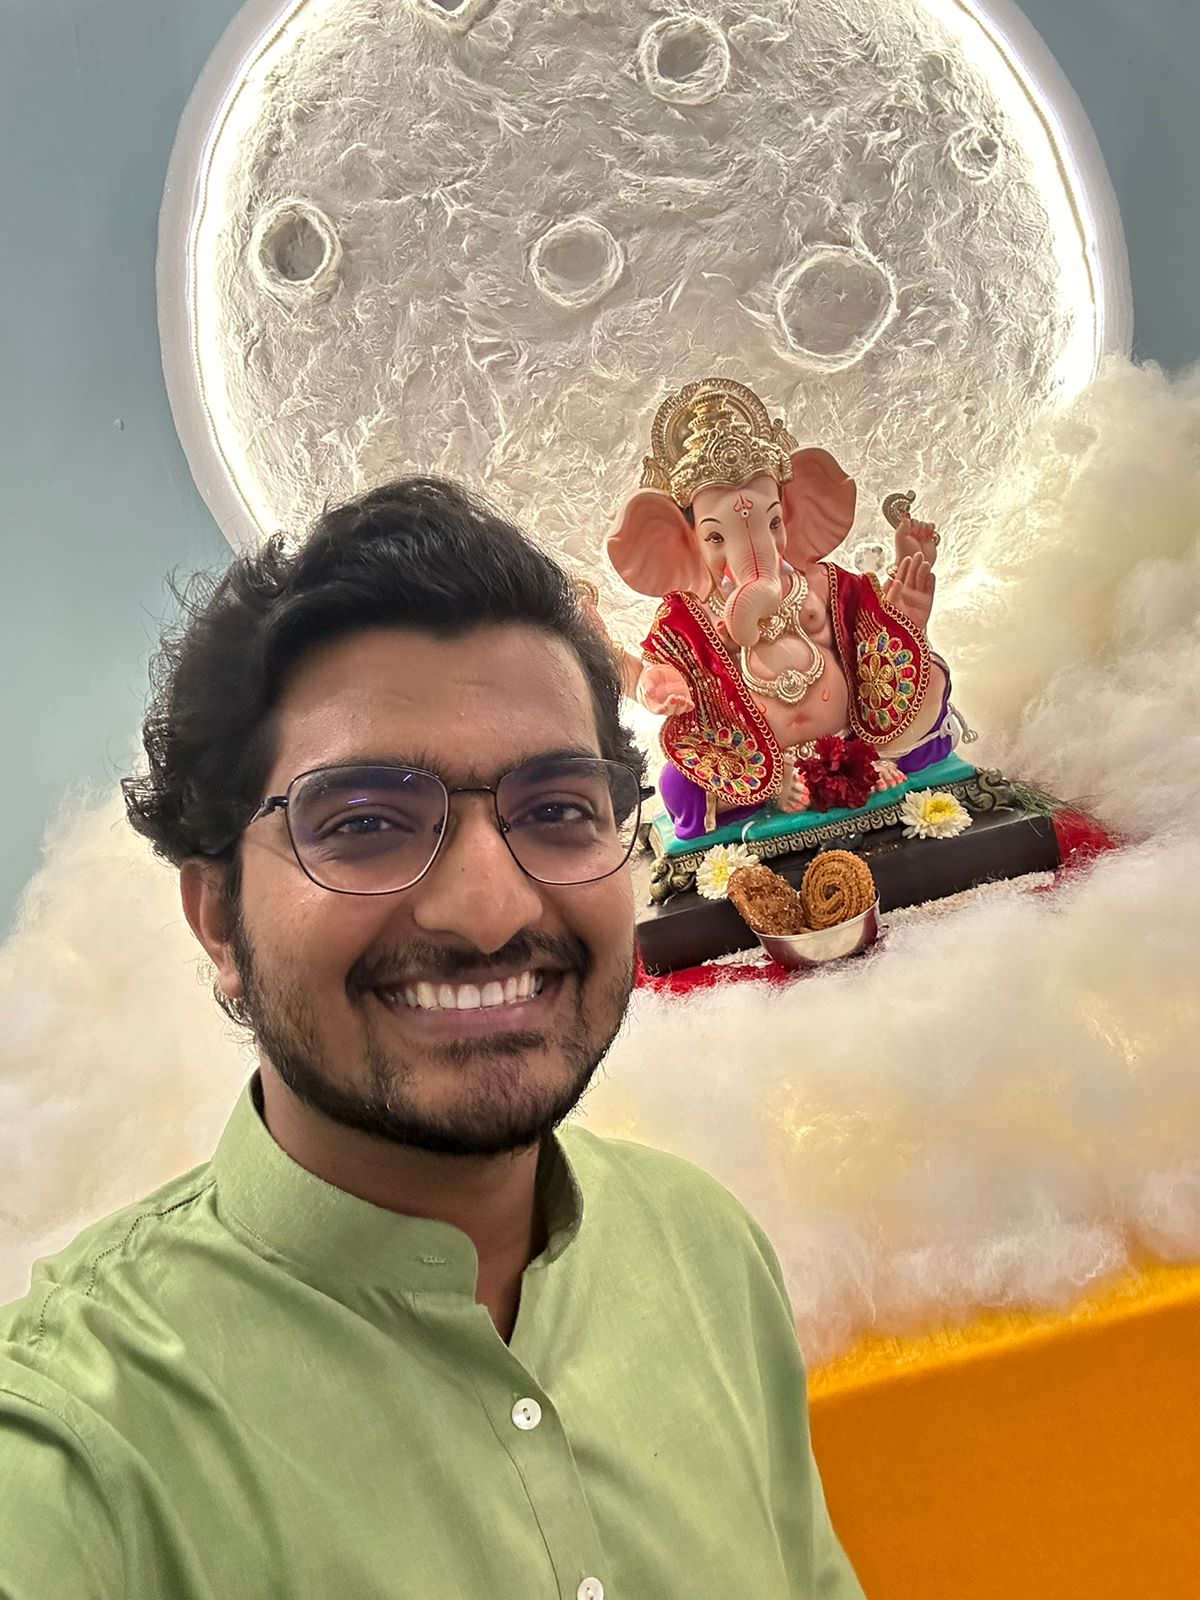 Prasad Vidhate, a well-known digital content creator, stepped up to the plate this year by taking charge of the Ganpati decorations. 